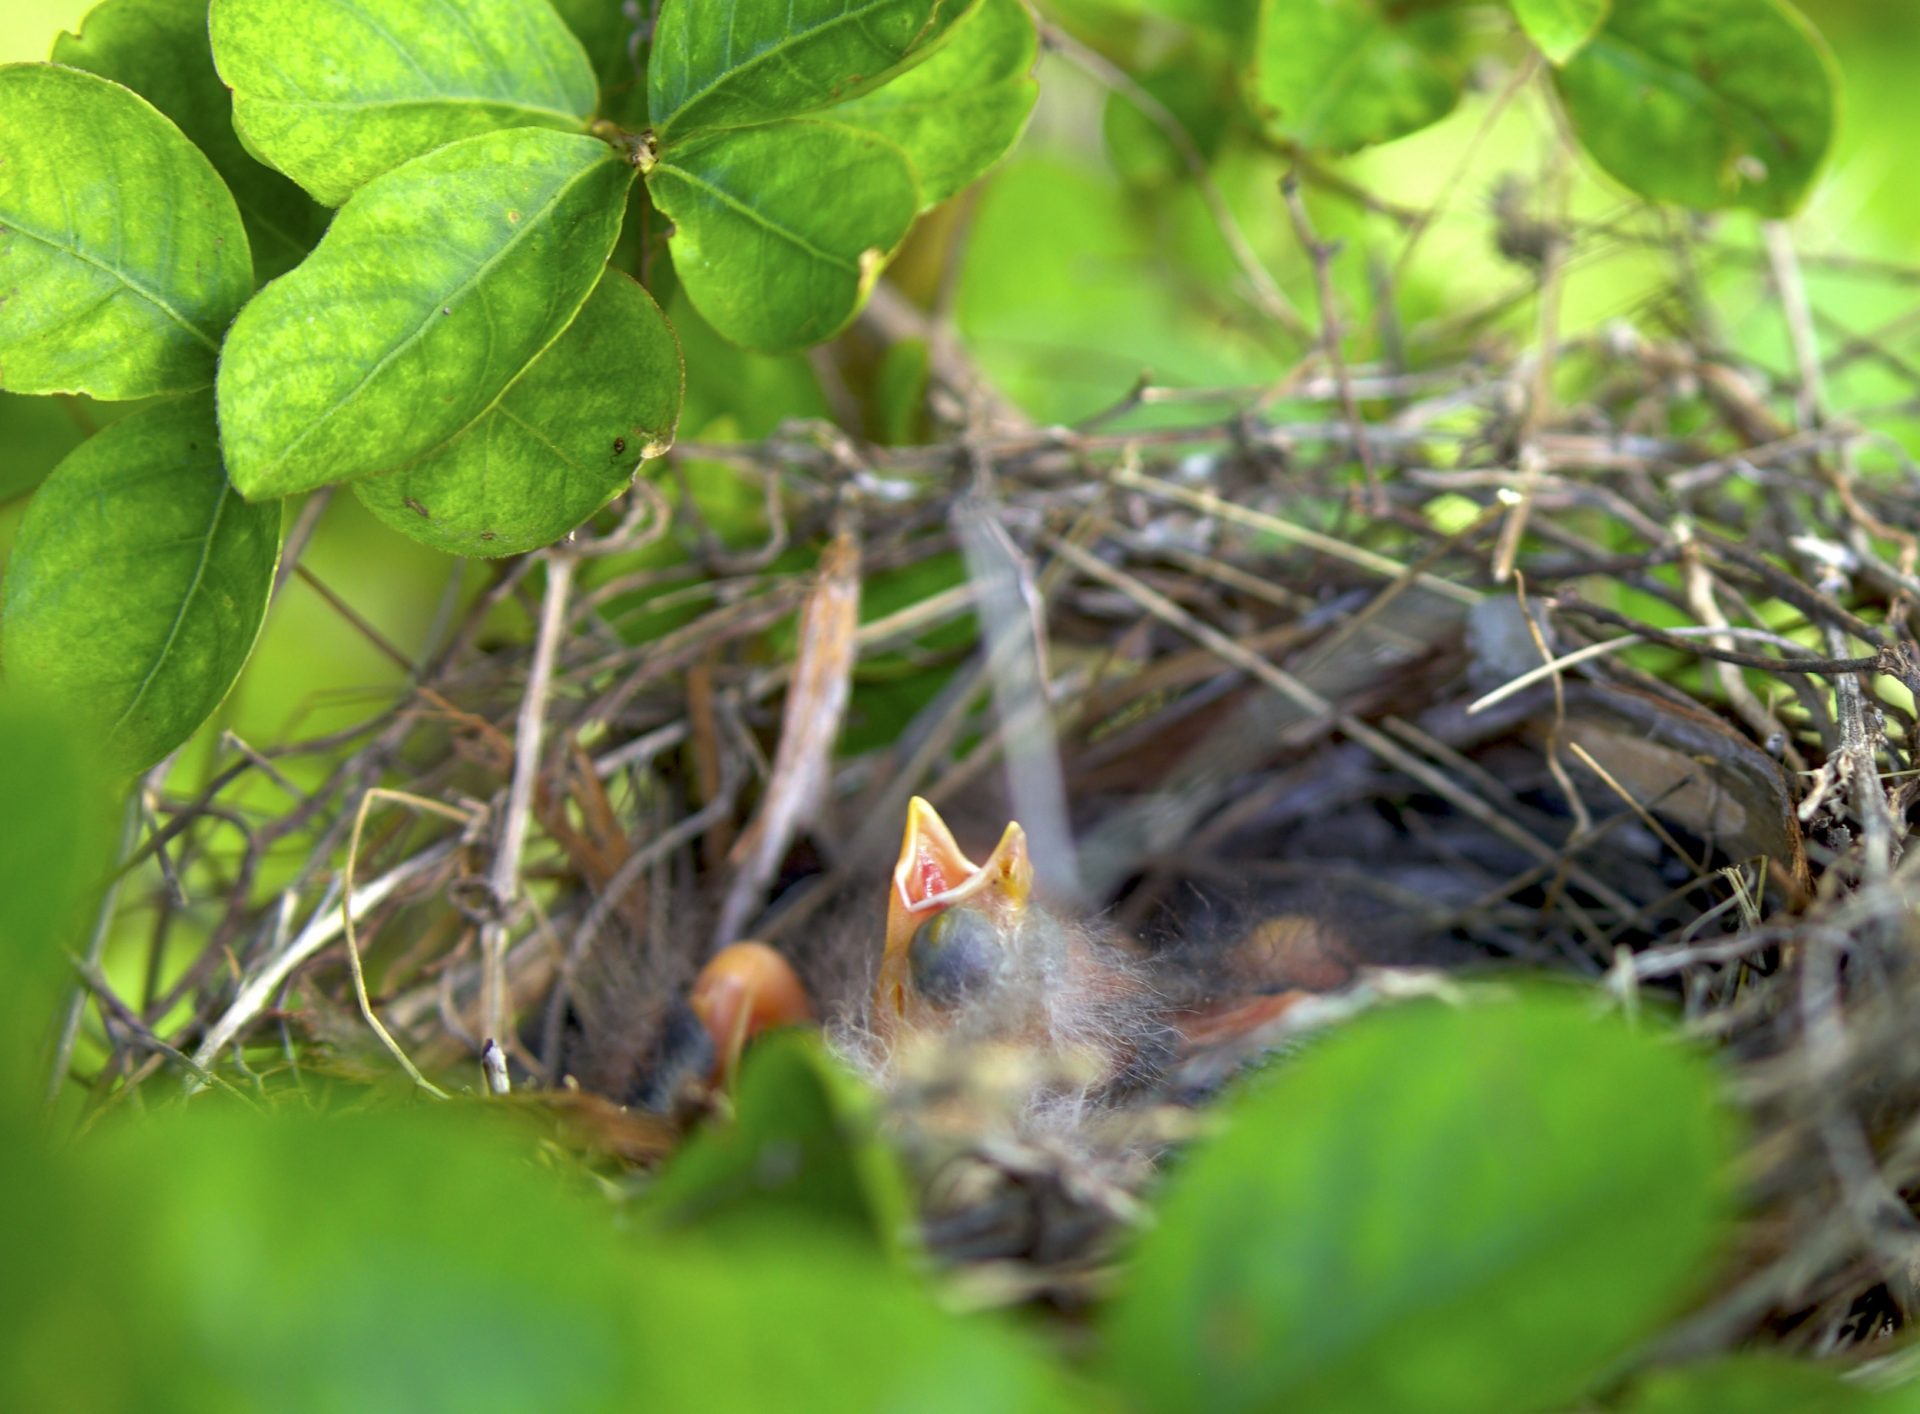 Baby cardinals with mouth open, surrounded by greenery